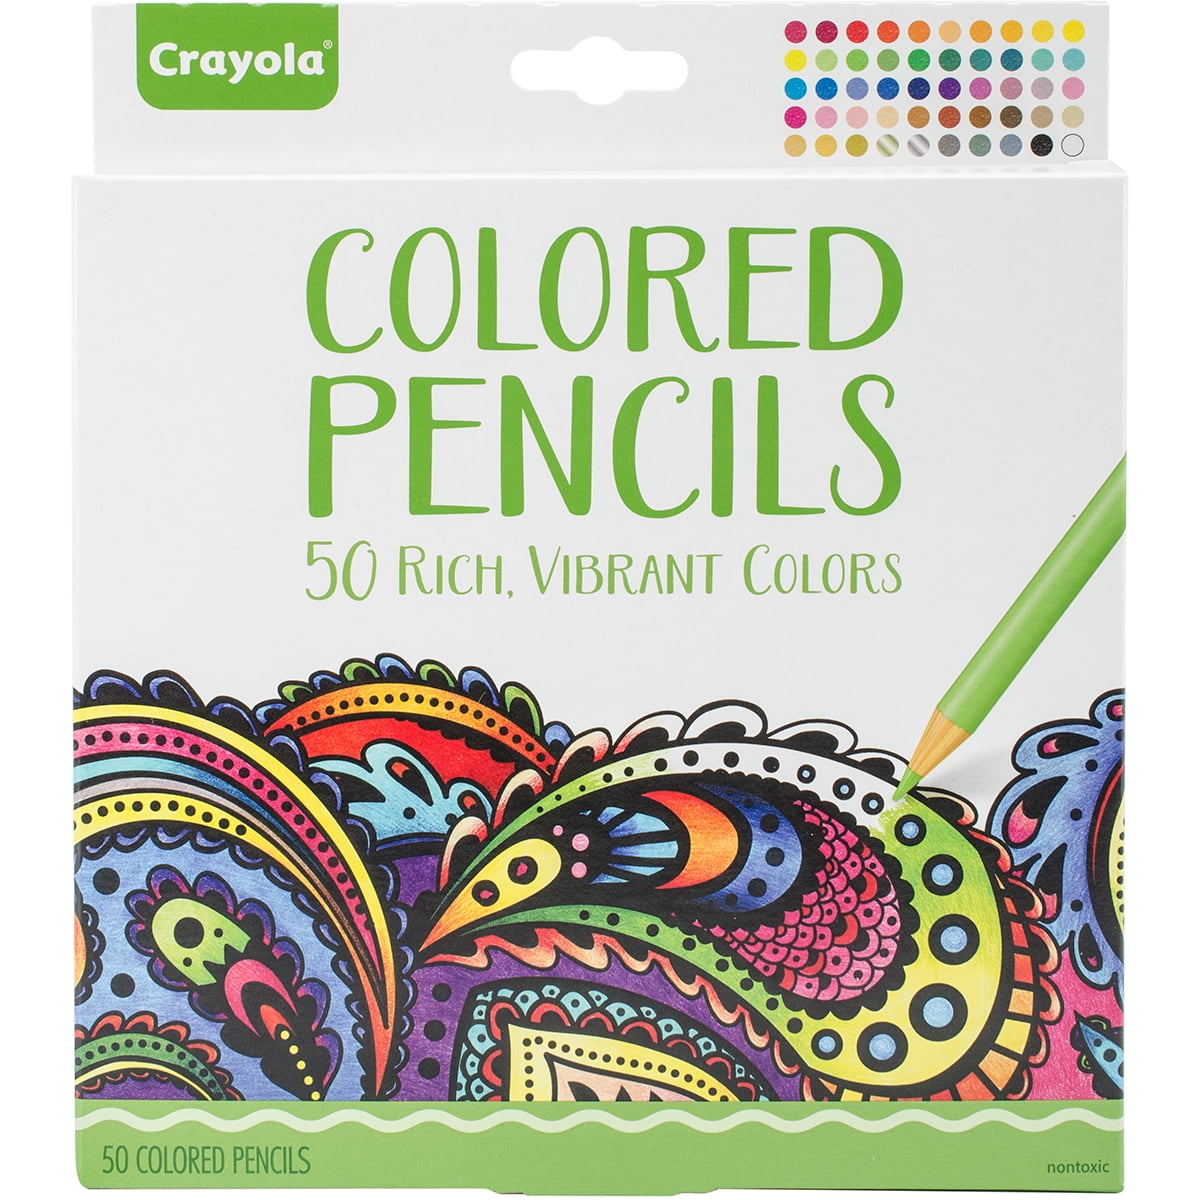  Crayola 50-Count Colored Pencils Only $3.97 (Regularly $13)